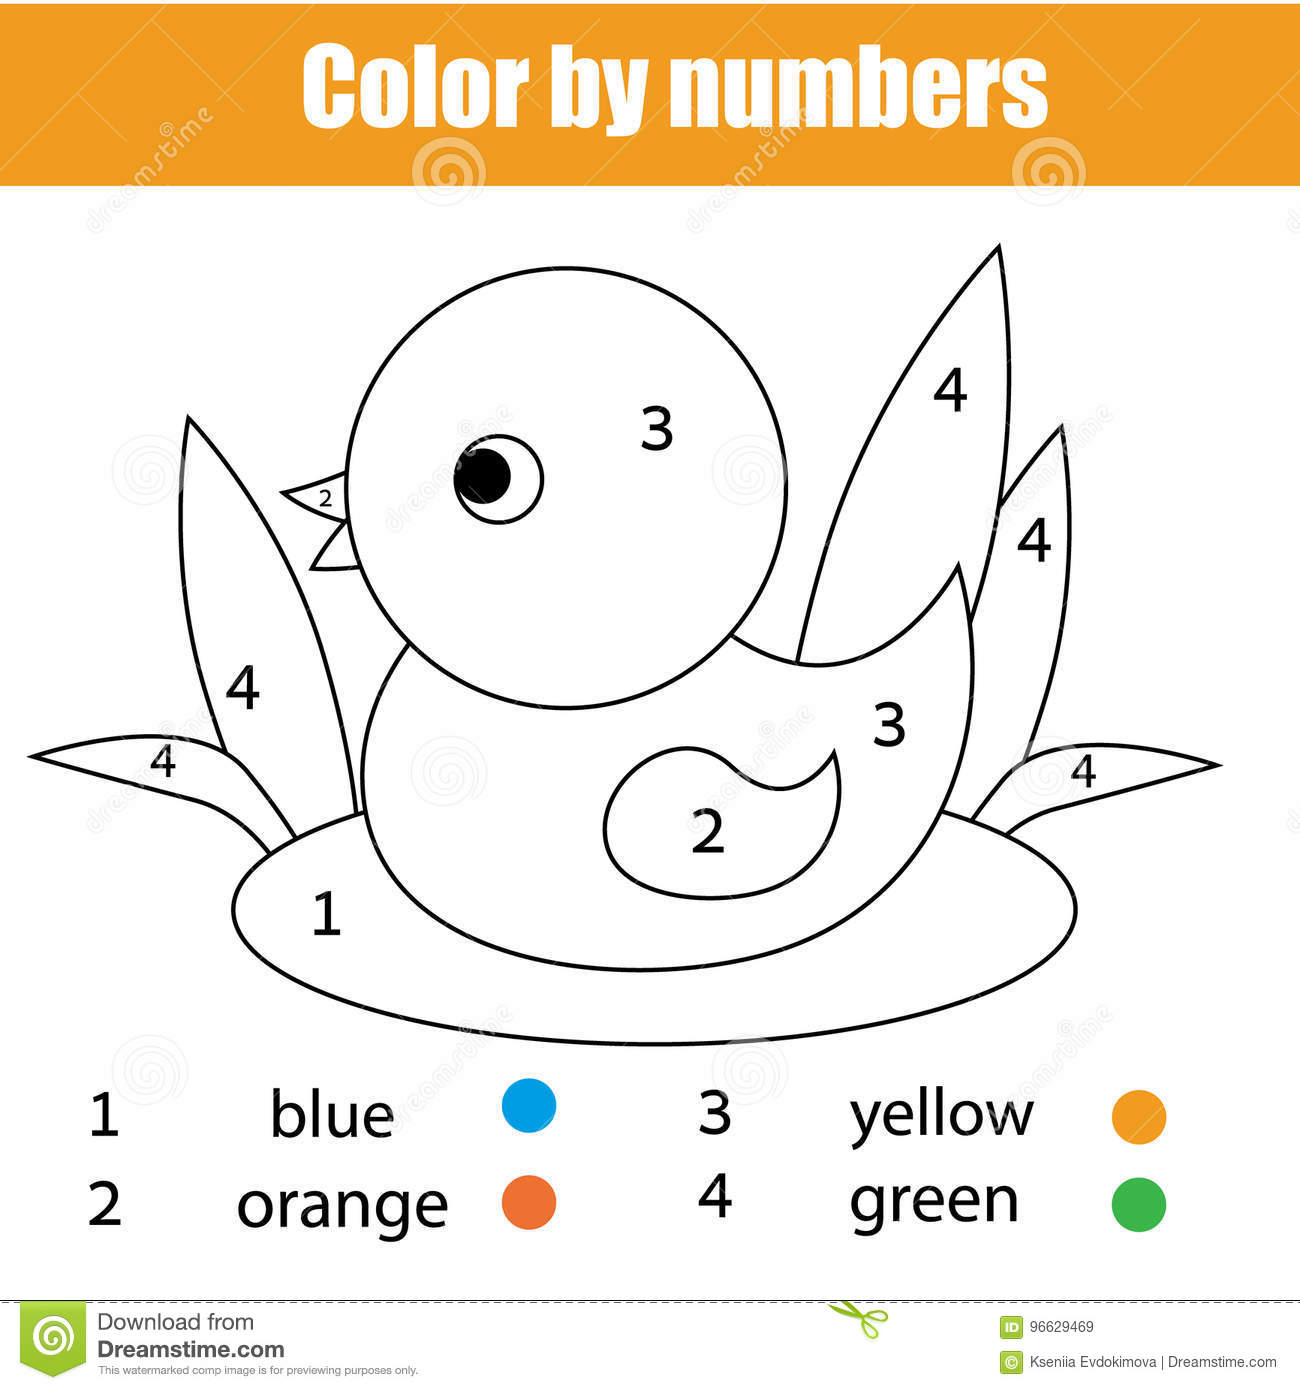 Coloring Page With Duck Bird. Colornumbers Educational Children - Toddler Learning Activities Printable Free